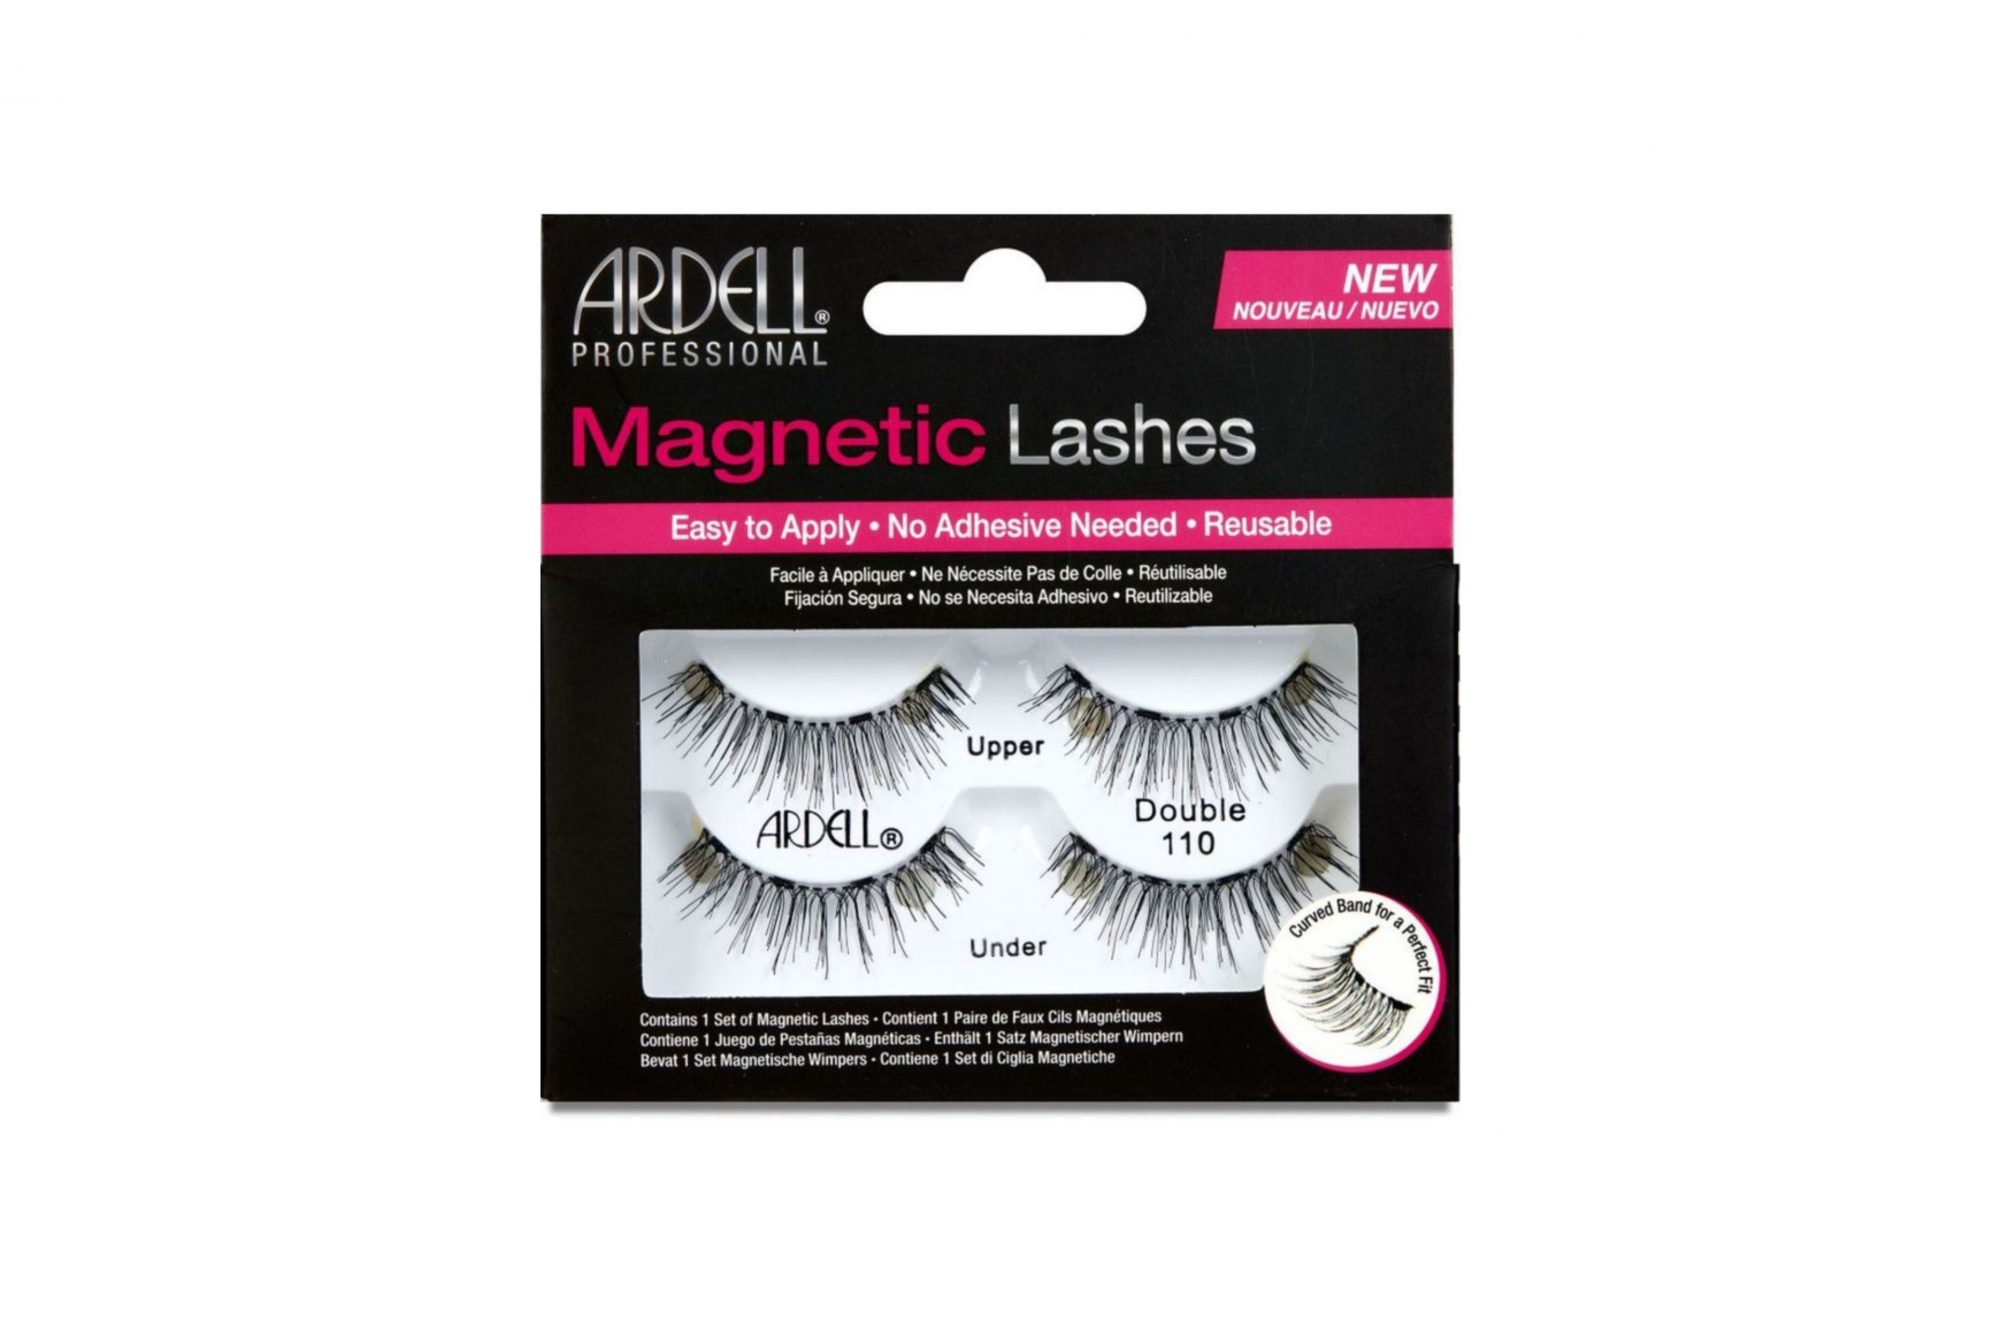 Are Ardell Magnetic Eyelashes Fda Approved?